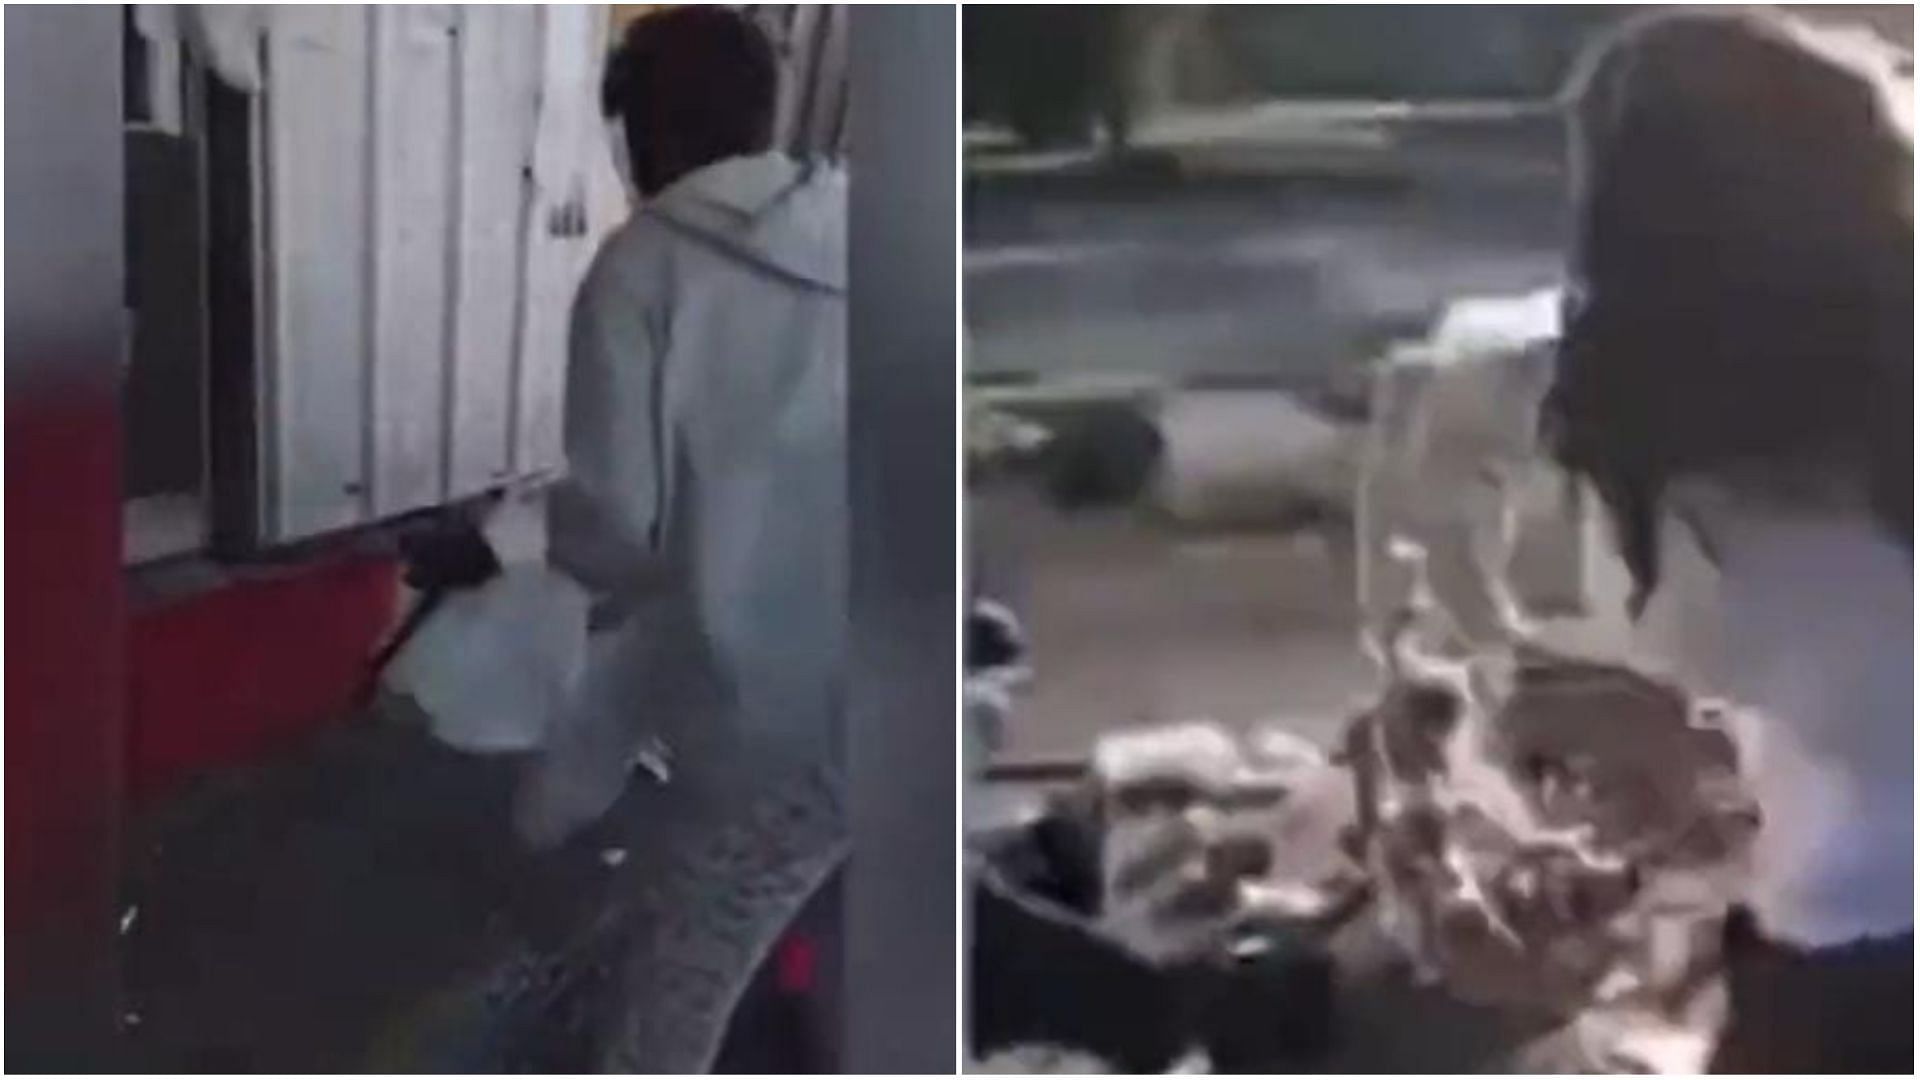 A Louisiana store worker was arrested for throwing water at a homeless woman (Images via Twitter @/MikeSington)